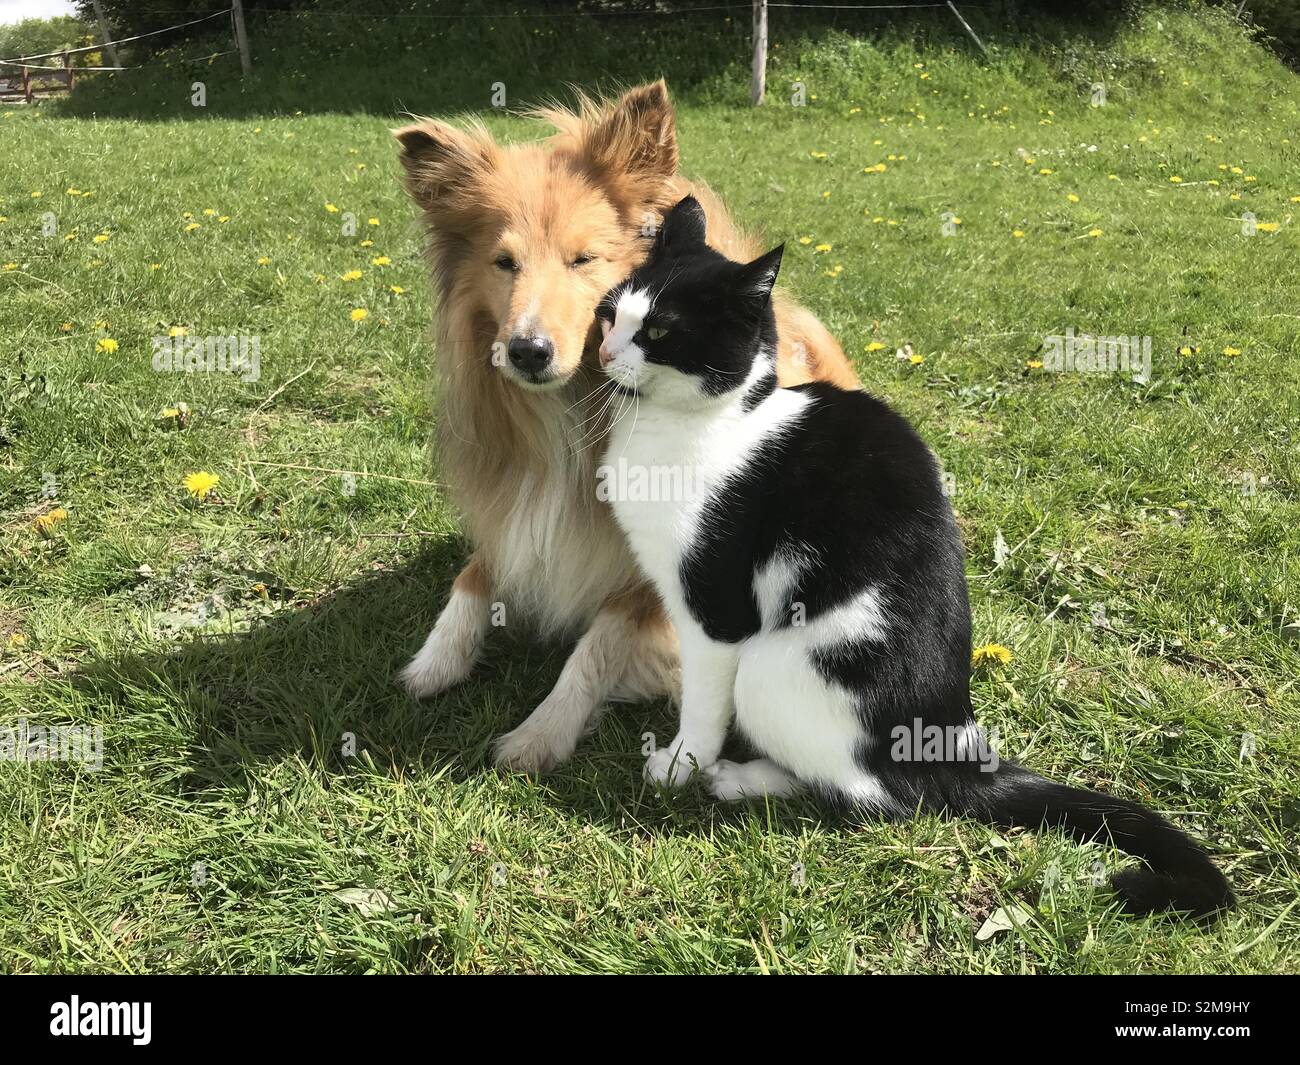 Best friends, cat and dog Stock Photo